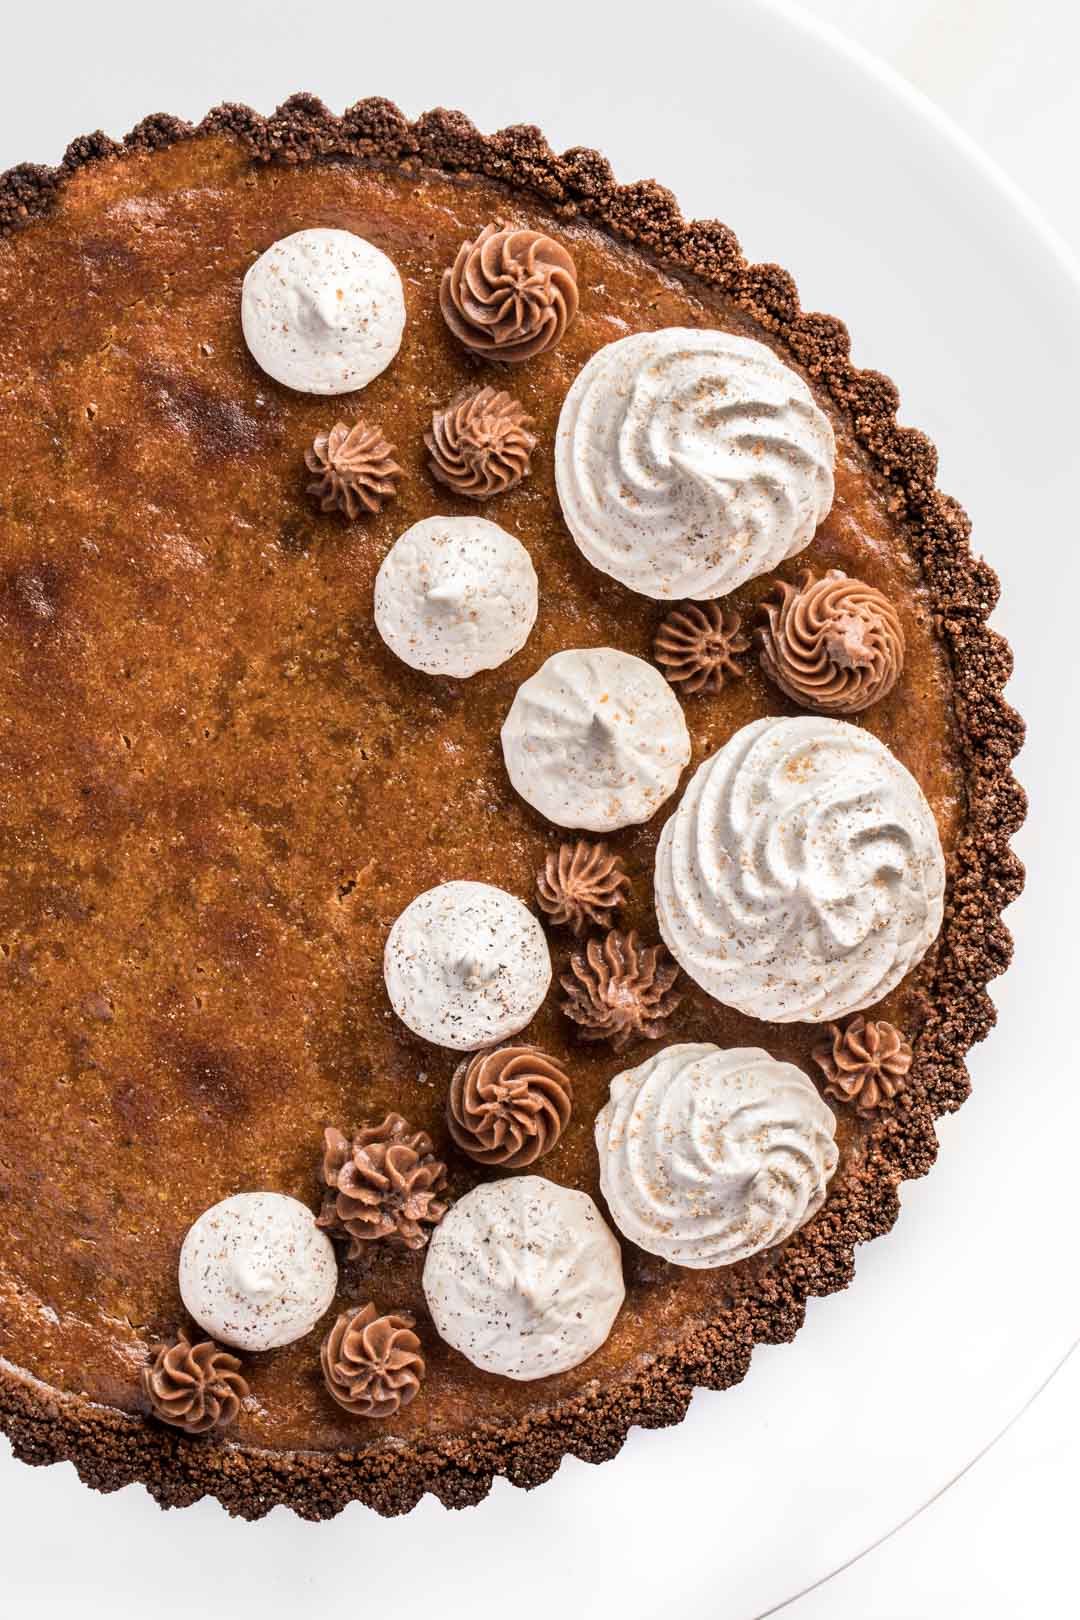 Gingersnap Pumpkin Tart with Nutmeg Meringues from SouthernFATTY.com